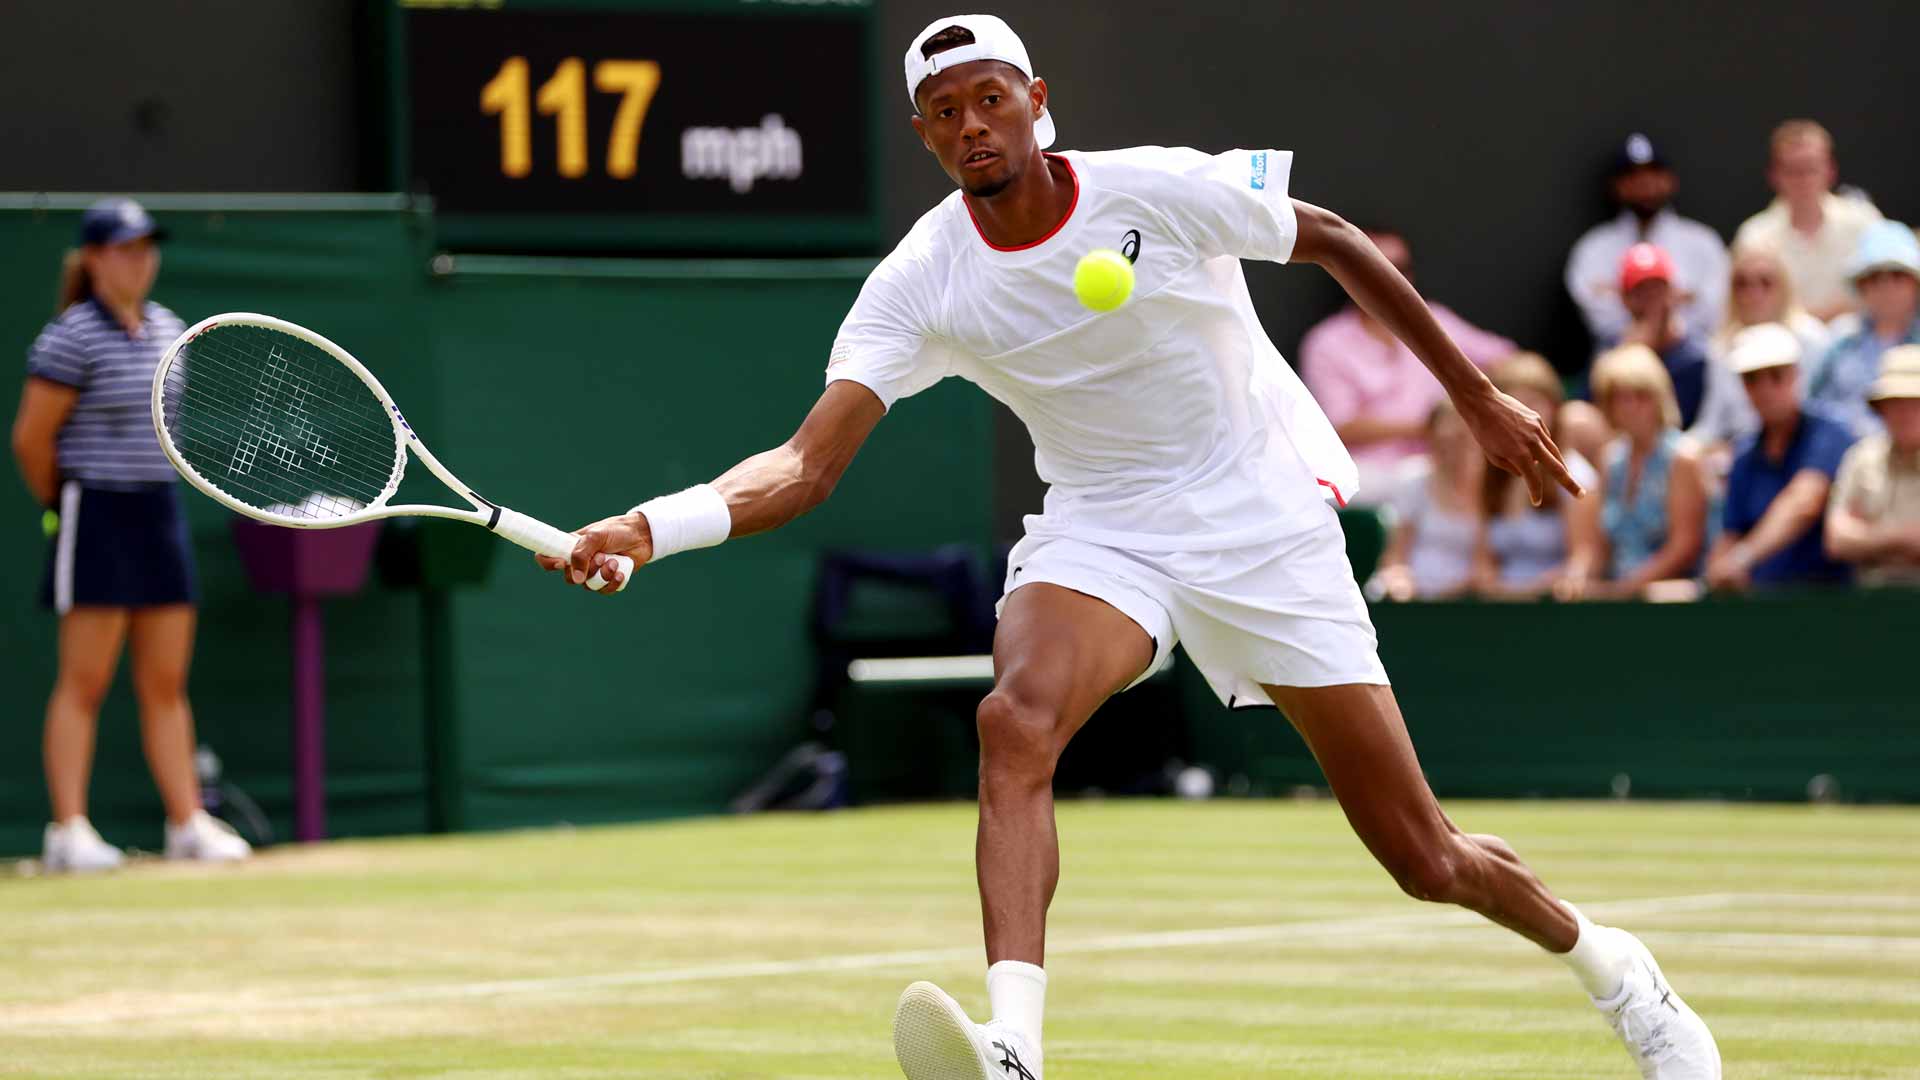 In his Wimbledon main-draw debut, Christopher Eubanks is into the quarter-finals.